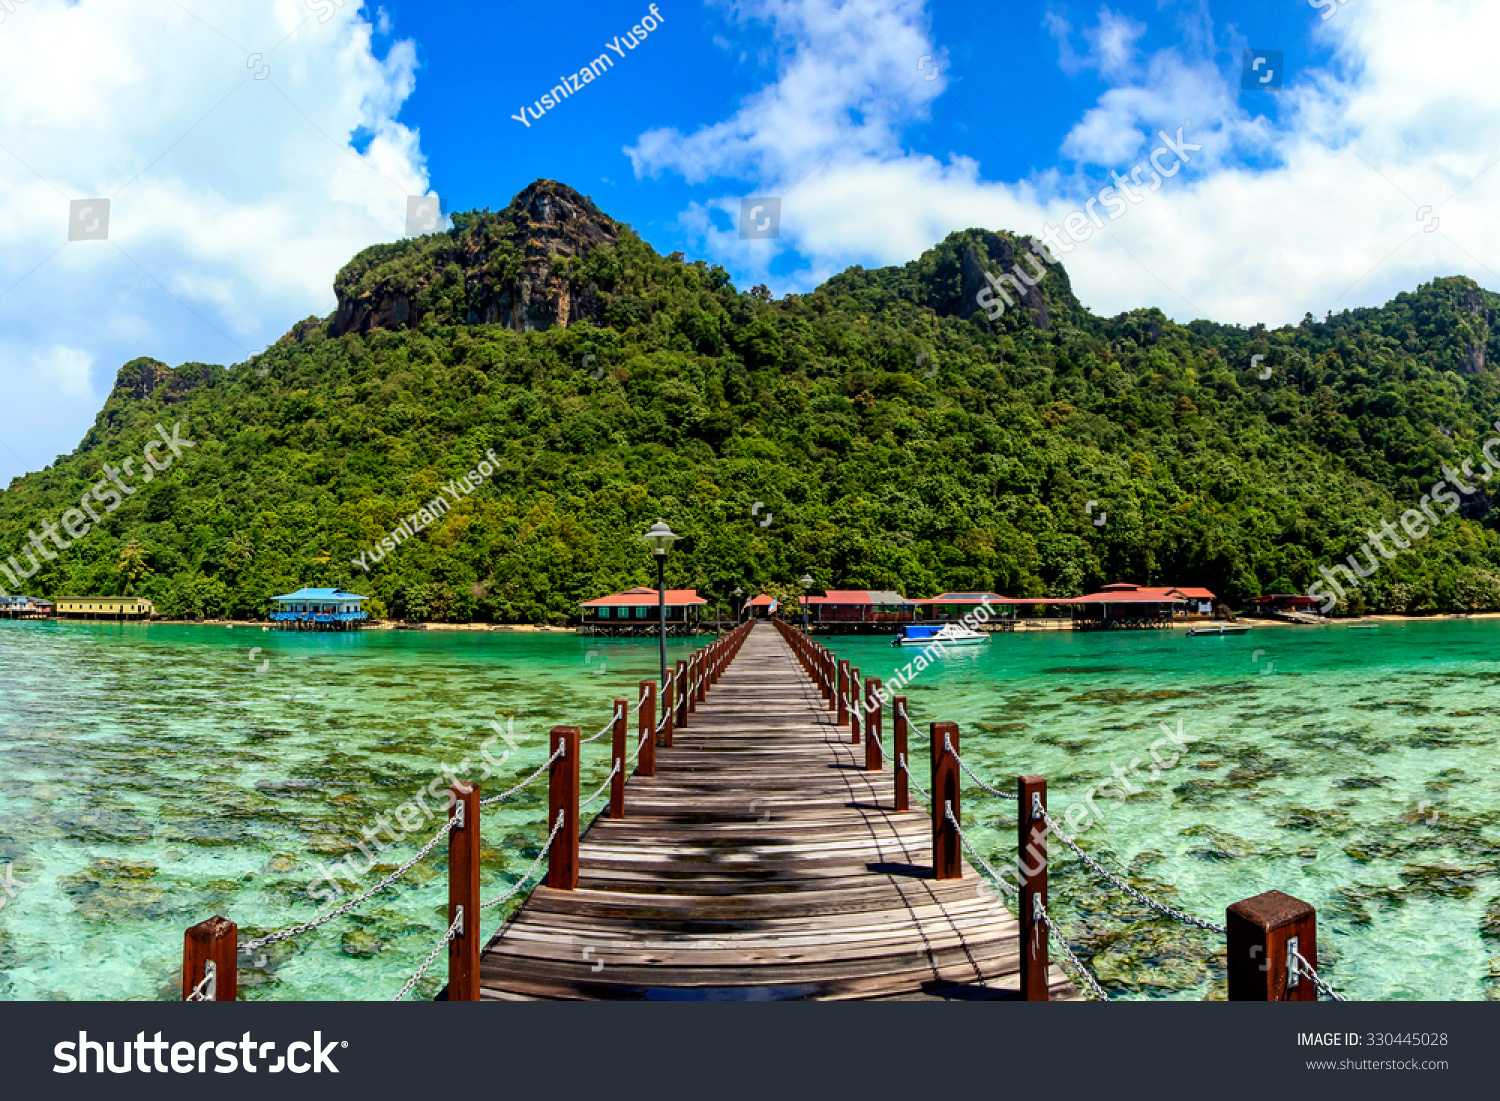 Corals reef and islands seen from the jetty of Bohey Dulang Island, Sabah, Malaysia. #330445028